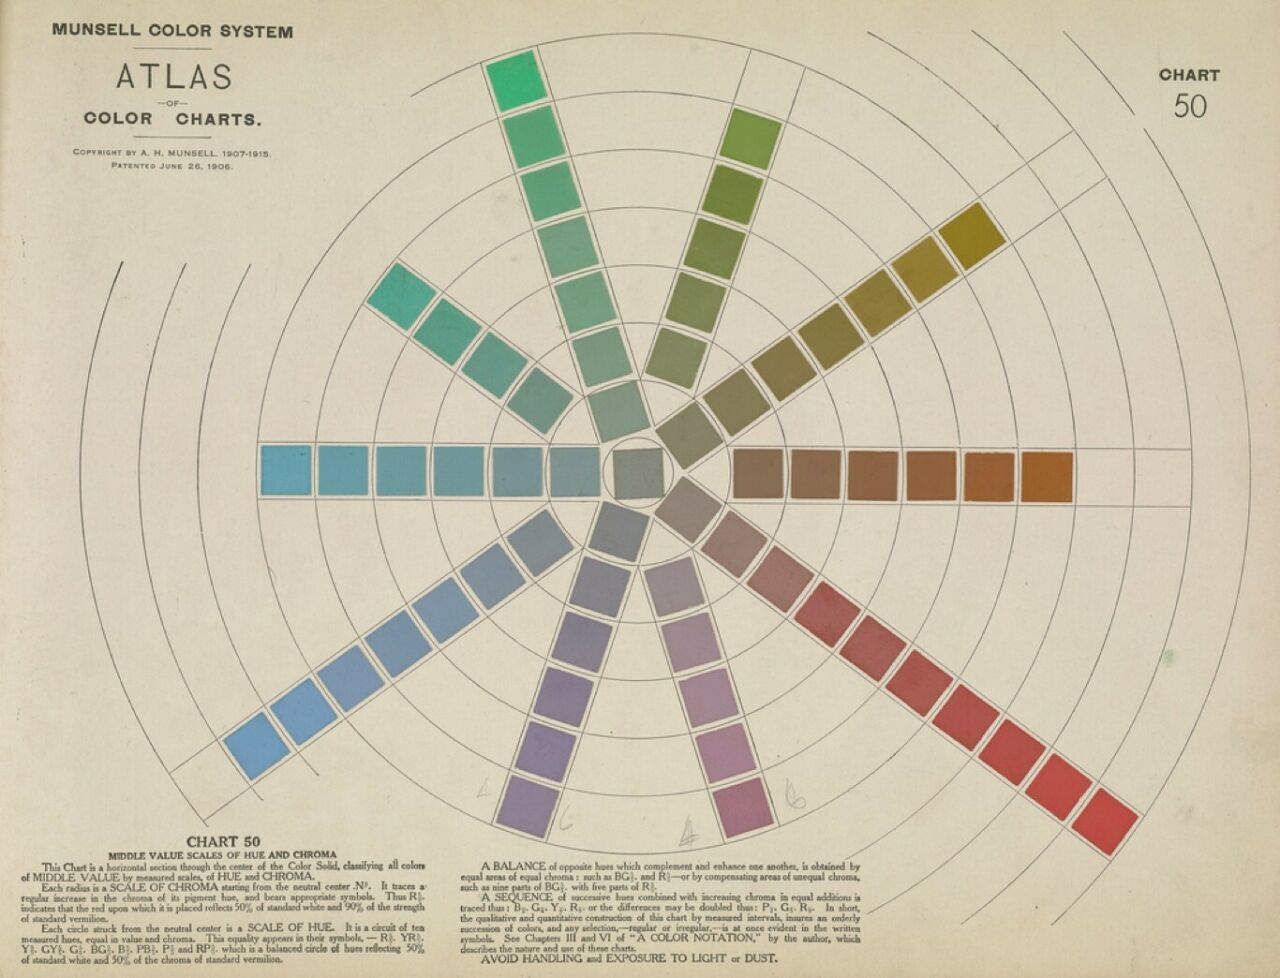 Scan of Munsell Color System Atlas Color Charts color wheel. Image courtesy Cooper Hewitt.